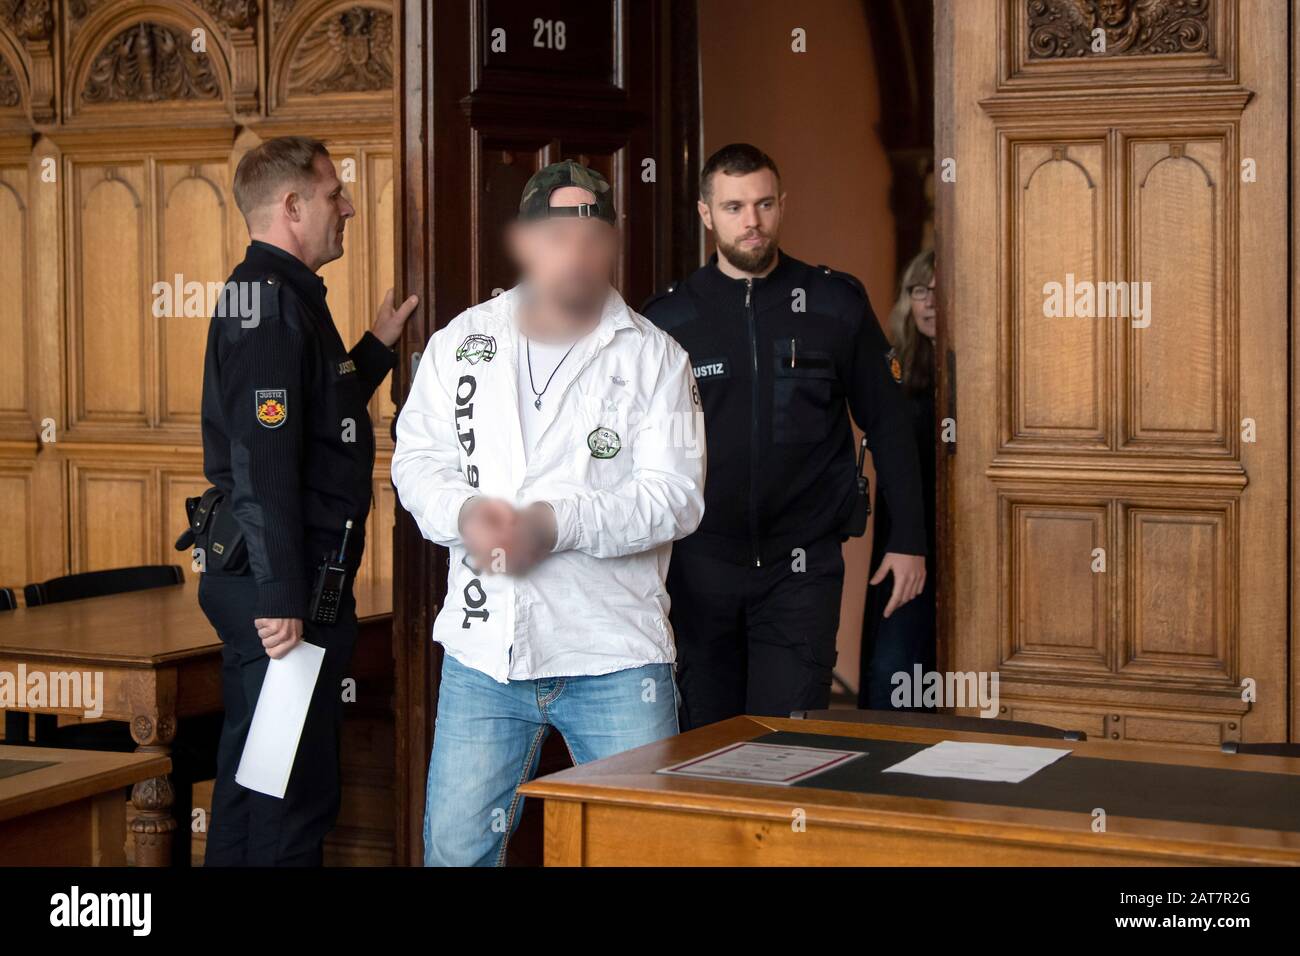 Bremen, Germany. 31st Jan, 2020. A defendant on trial for murder is led into the courtroom. The two defendants were convicted of murder with a kitchen knife and a steak knife. The victim died from the injuries. Credit: Sina Schuldt/dpa - ATTENTION: Person(s) has (have) been pixelated for legal reasons/dpa/Alamy Live News Stock Photo